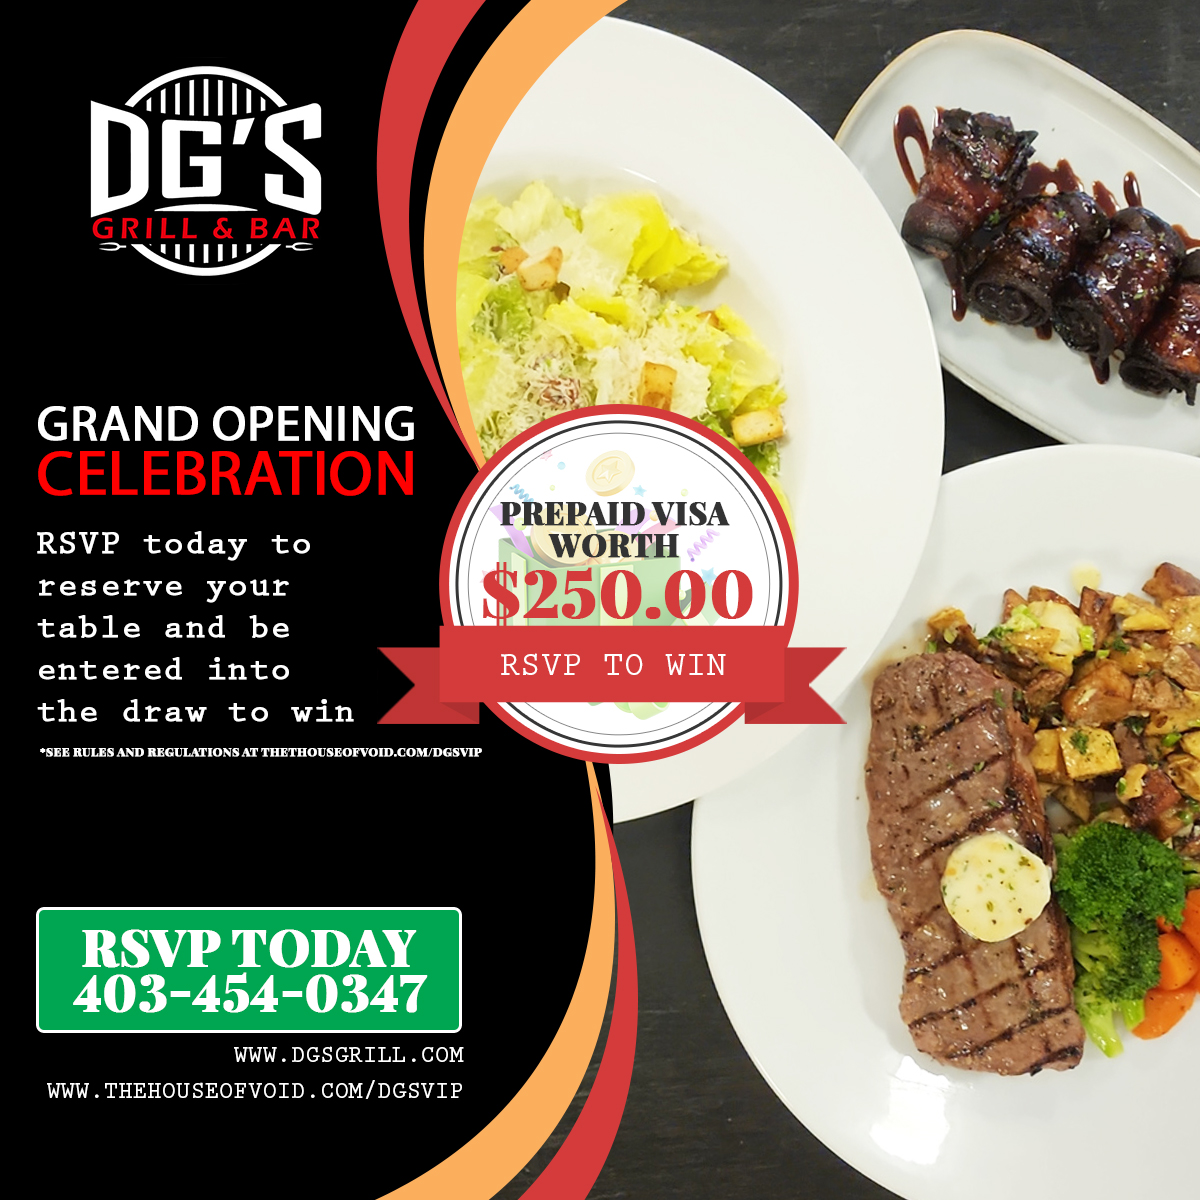 🎉 Join the celebration at DG's Grill and Bar! 🌟 Enter our Grand Opening Contest for a chance to win big! Don't miss out – RSVP now: thehouseofvoid.com/dgs-celebratio… #CalgaryFood #YYCFood #CalgaryFoodies #YYCEats #CalgaryRestaurants #CalgaryDining #YYCFoodie #CalgaryFoodBlogger